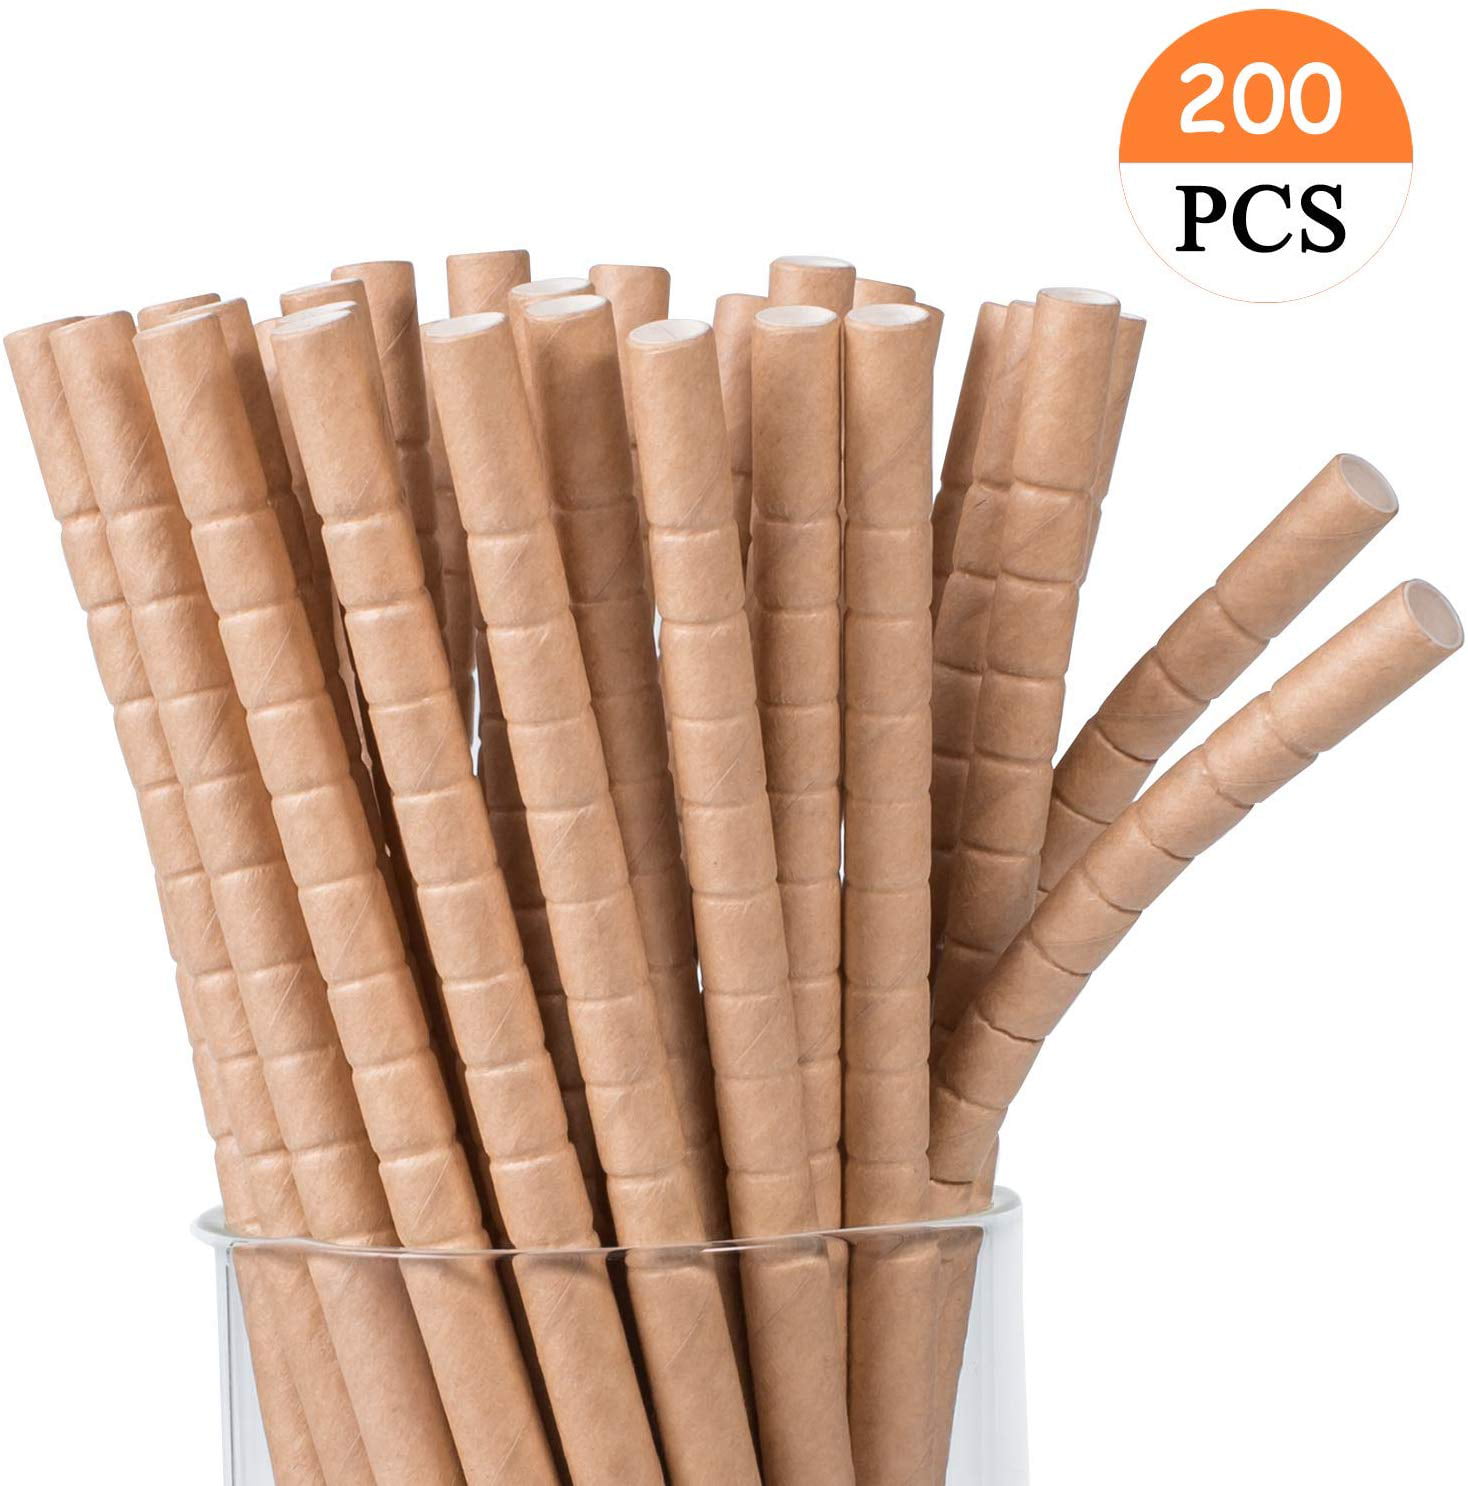 100 Pcs Biodegradable Bamboo Print Paper Drinking Straws for Juices Shakes and Smoothies Party Supplies